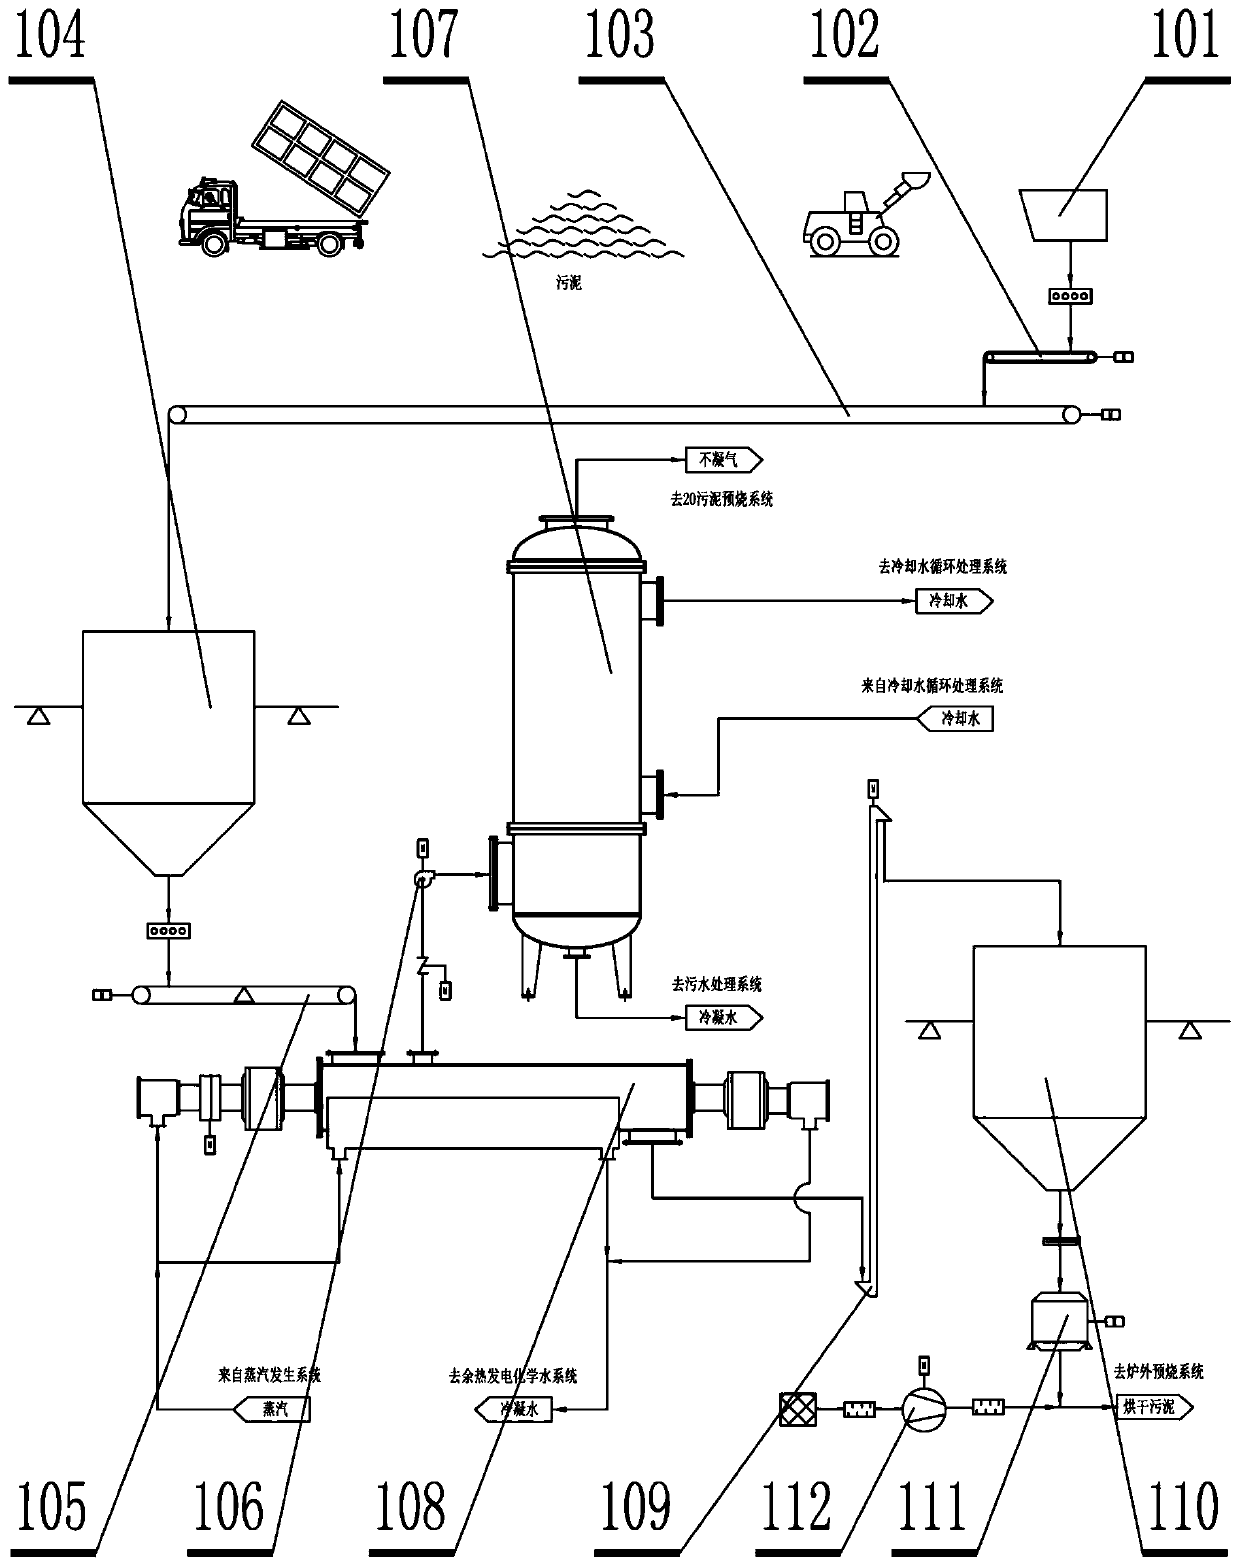 Treatment process and treatment system for municipal sludge